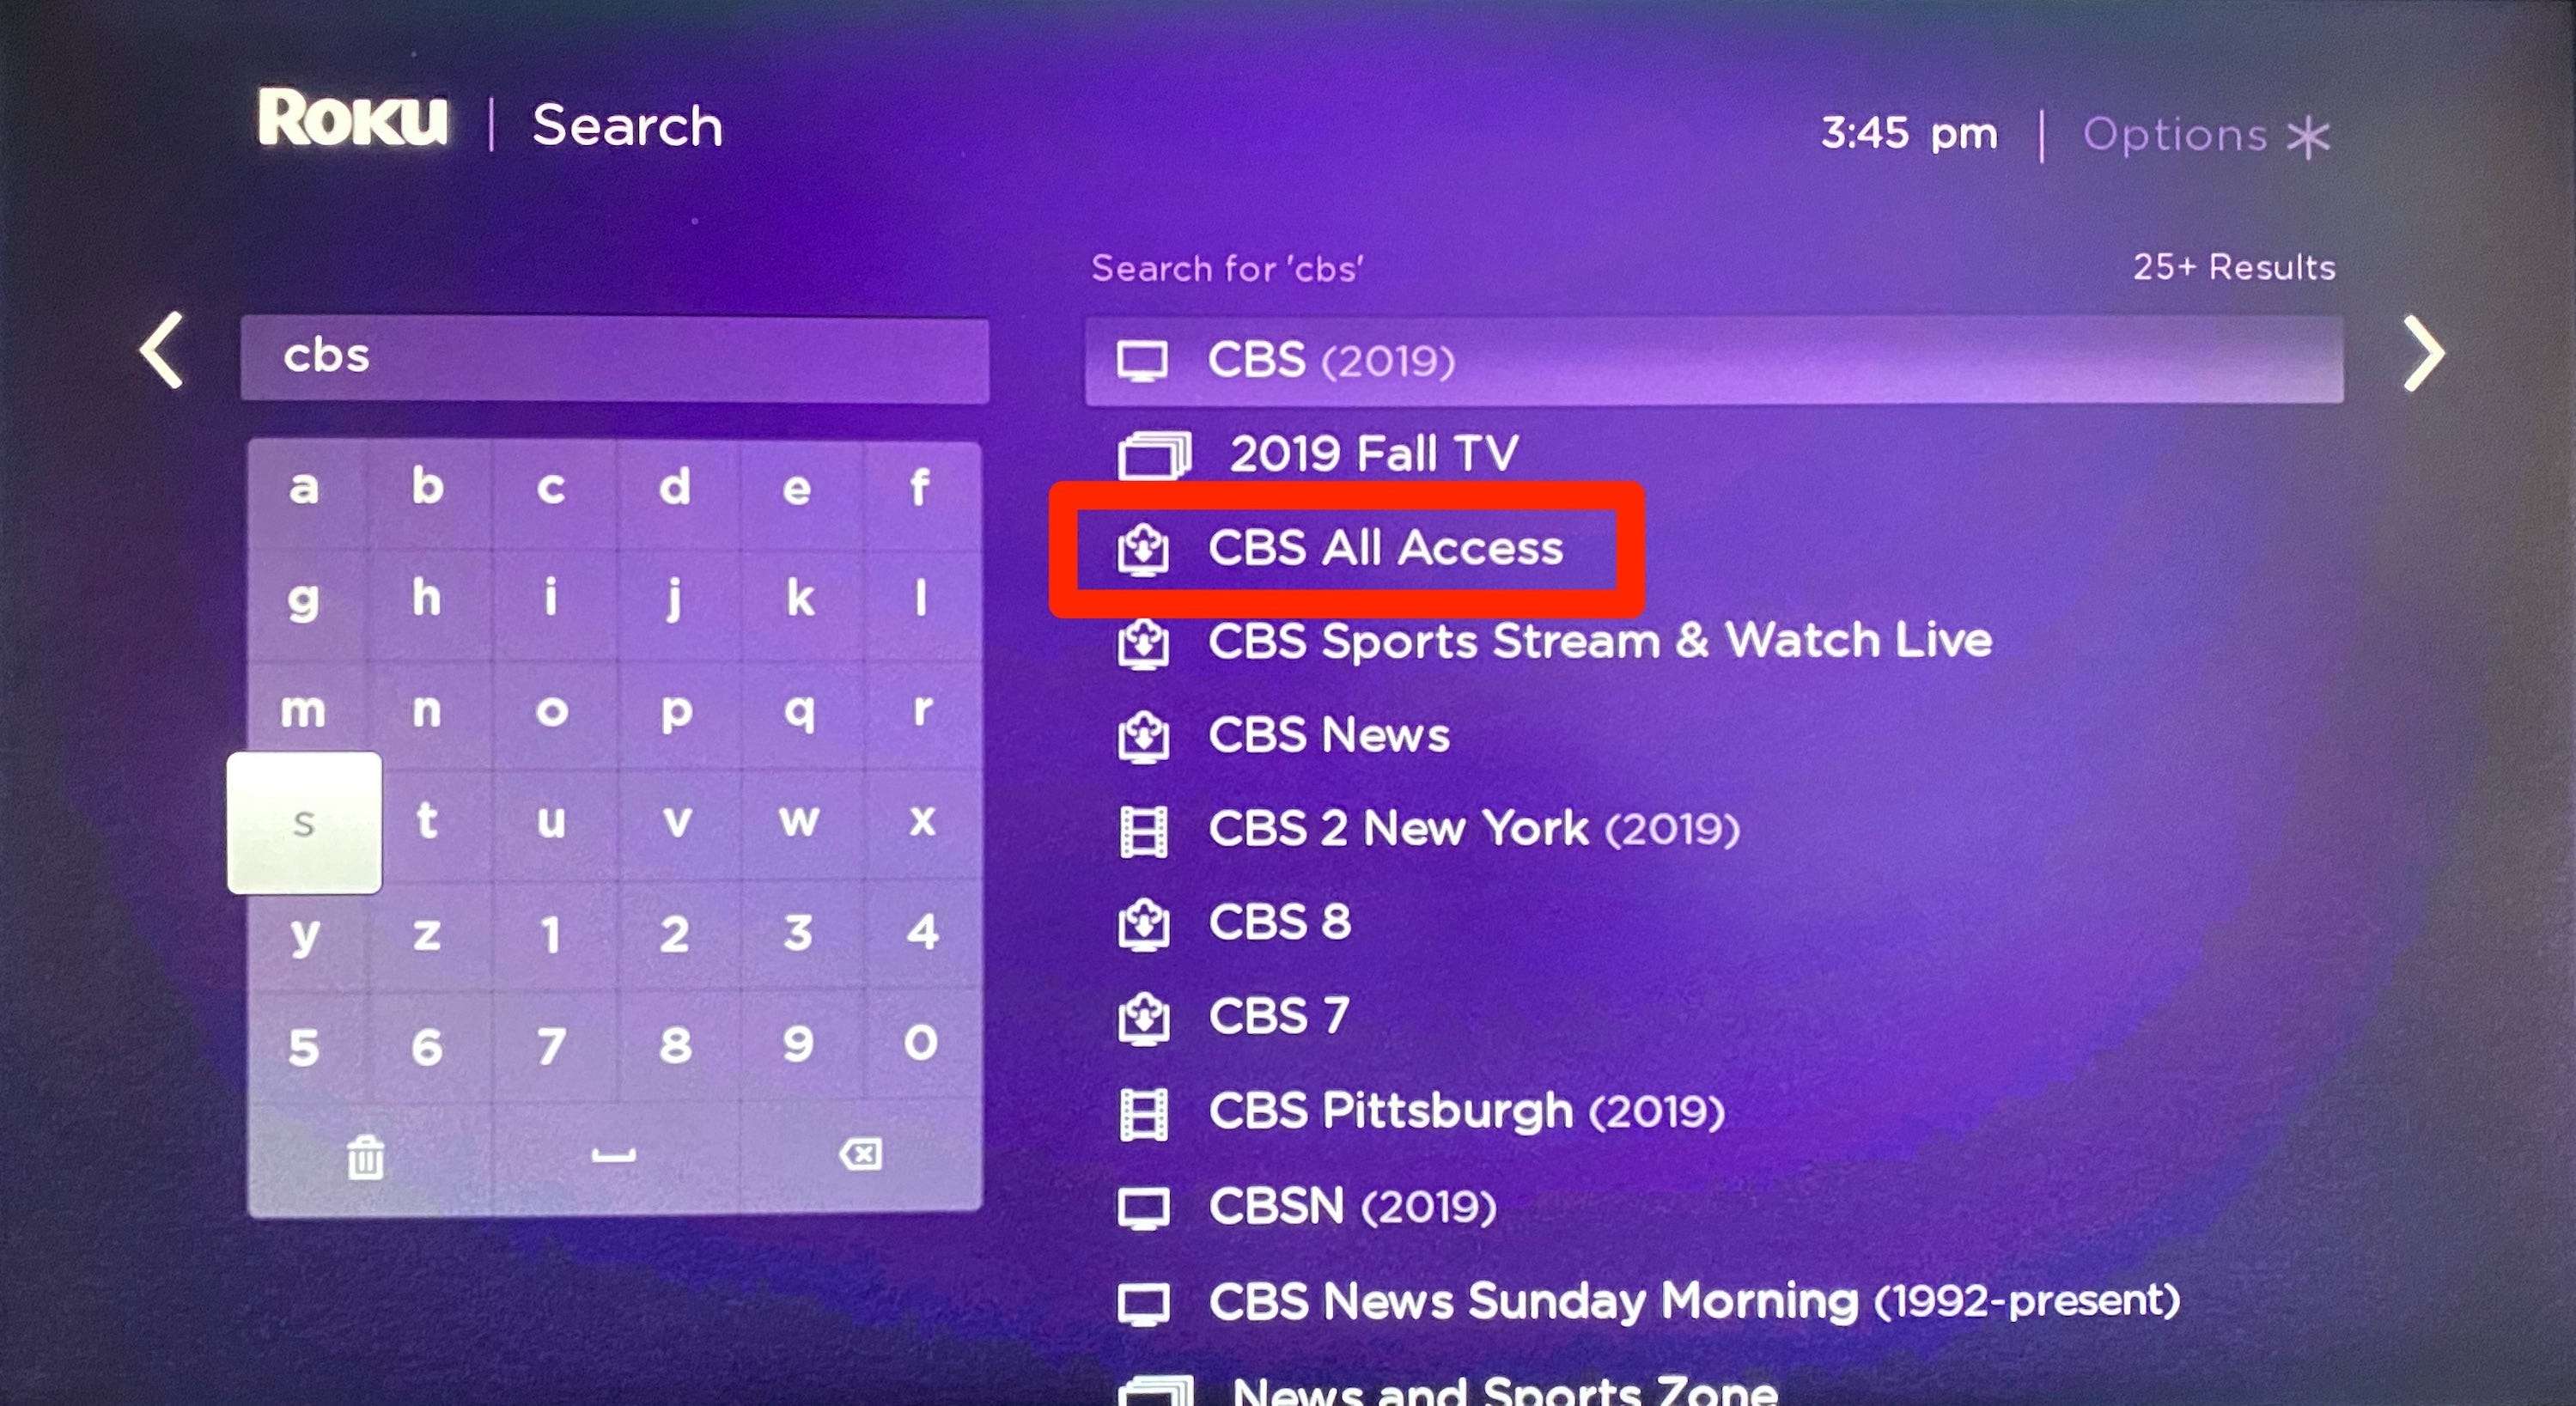 You can watch CBS in Rogue, but you need to download a CBS or live TV app - all you need to know here